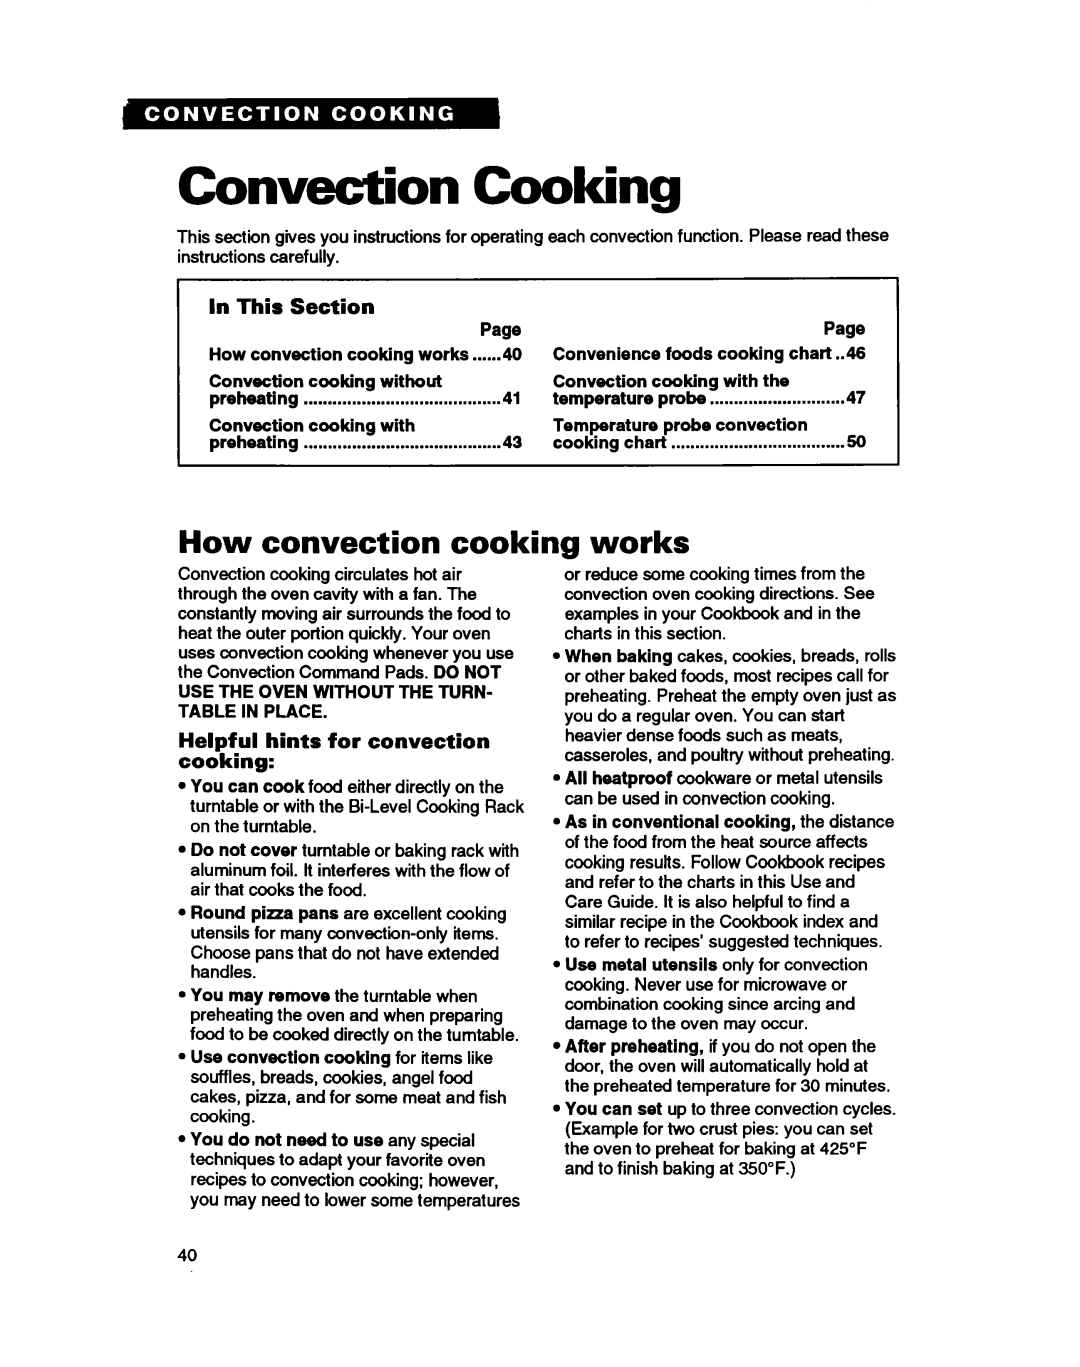 Whirlpool MC8130XA Convection Cooking, How convection cooking, works, I In This Section, Helpful, hints, for convection 